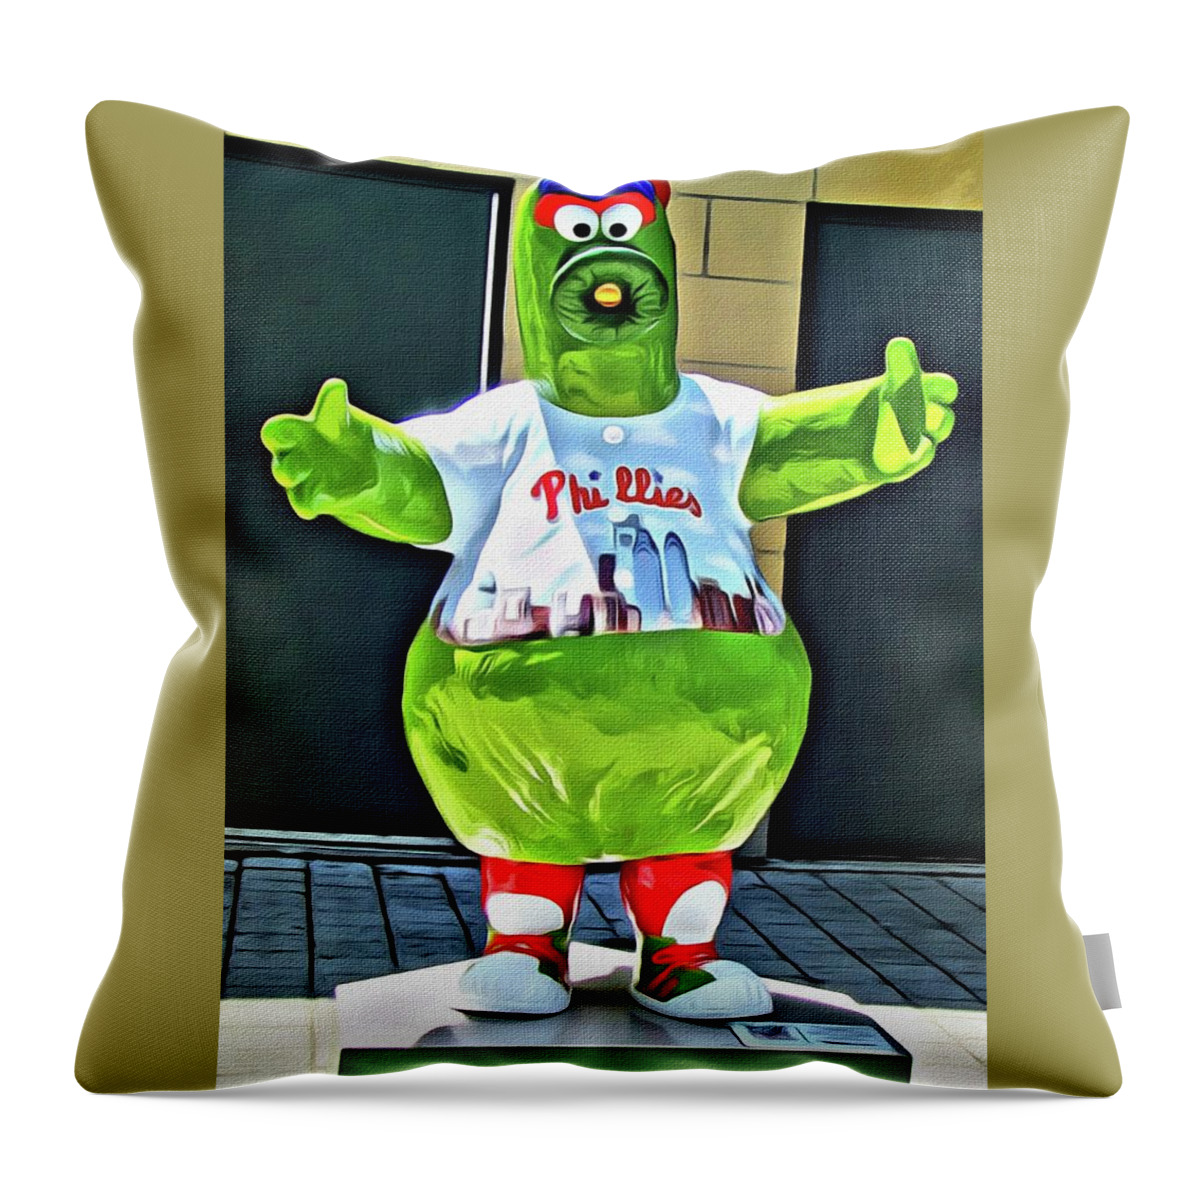 Alicegipsonphotographs Throw Pillow featuring the photograph He's Phanatic by Alice Gipson